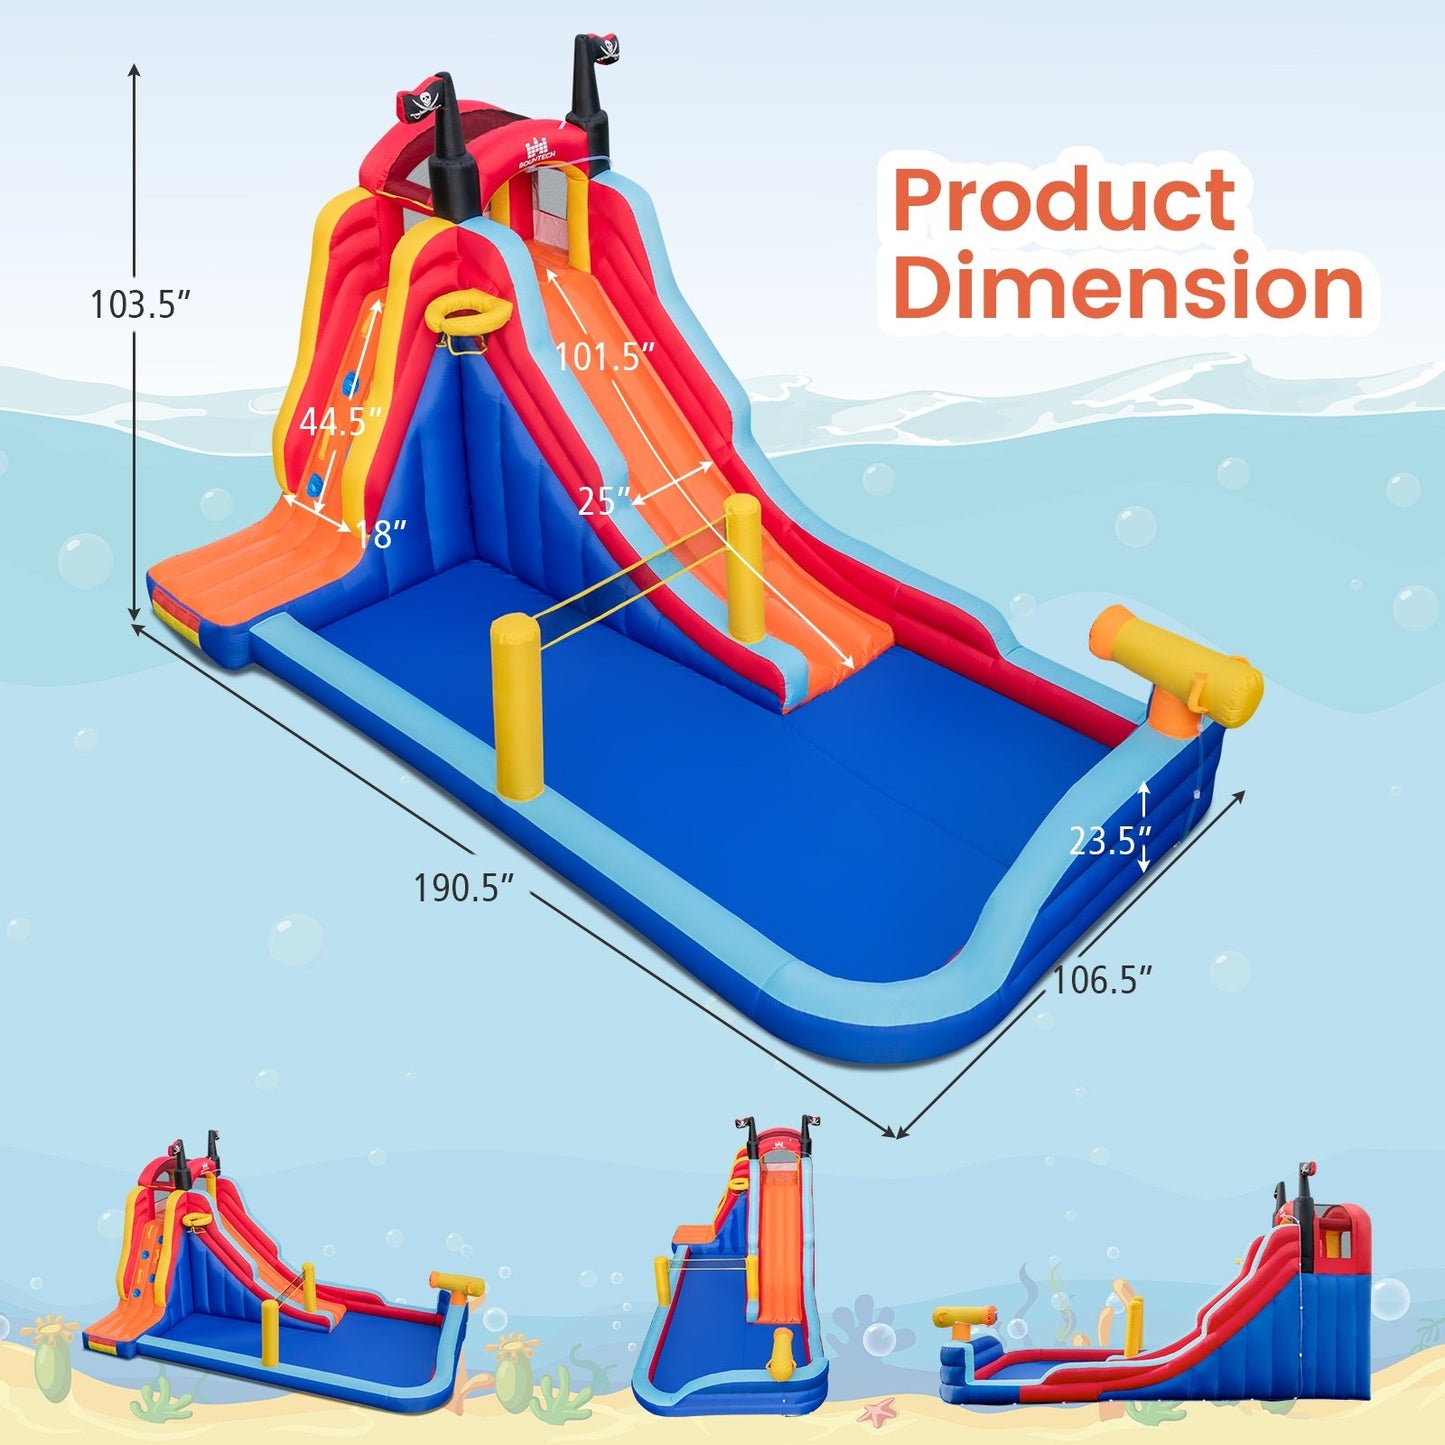 5-in-1 Inflatable Bounce House with 2 Water Slides and Large Splash Pool With 750W Blower, Blue